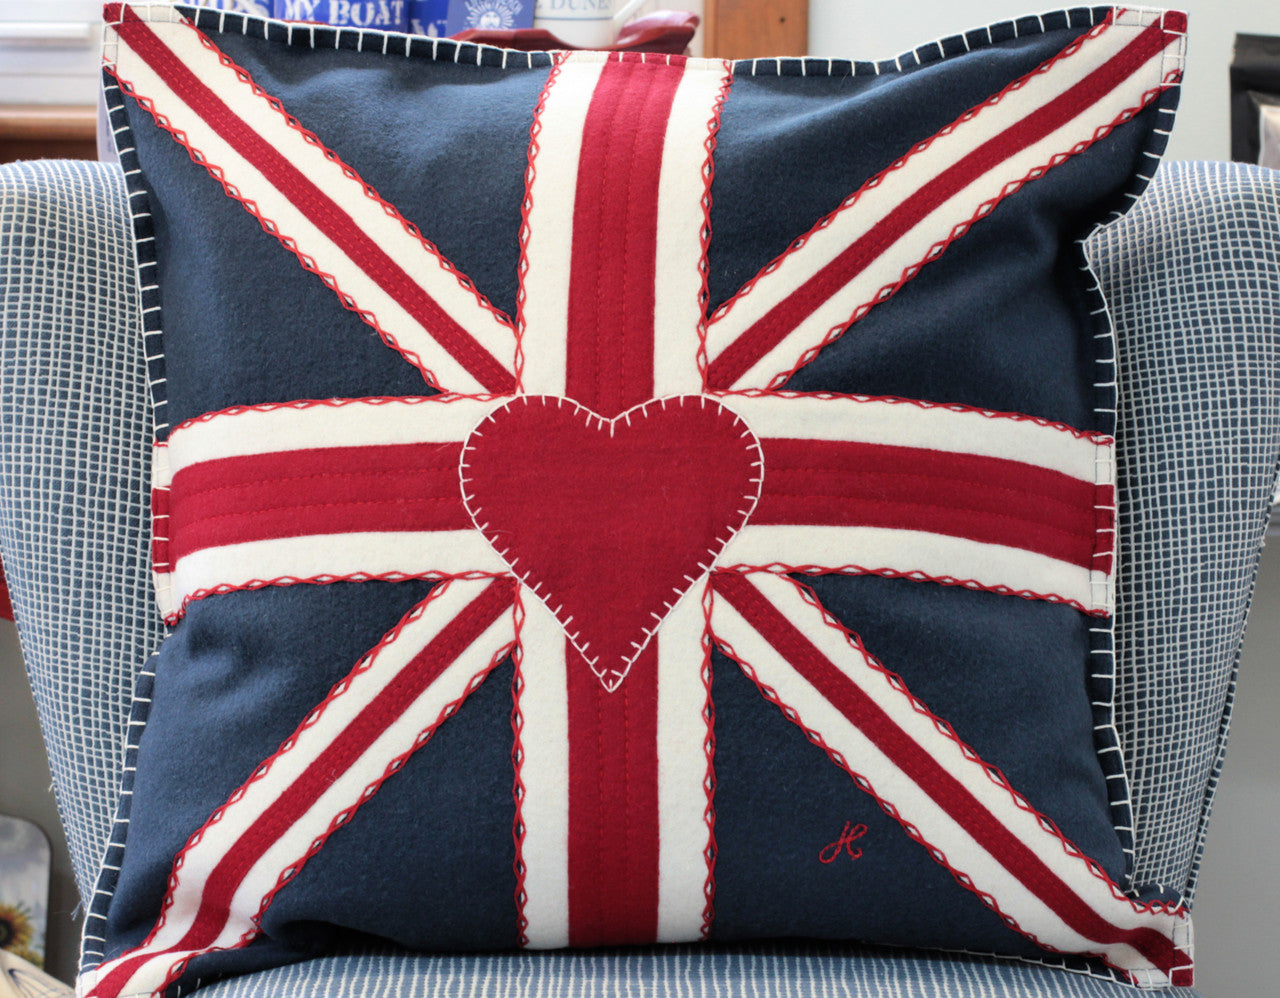 Hand-embroidered Union Jack Square Navy Pillow from British designer Jan Constantine.